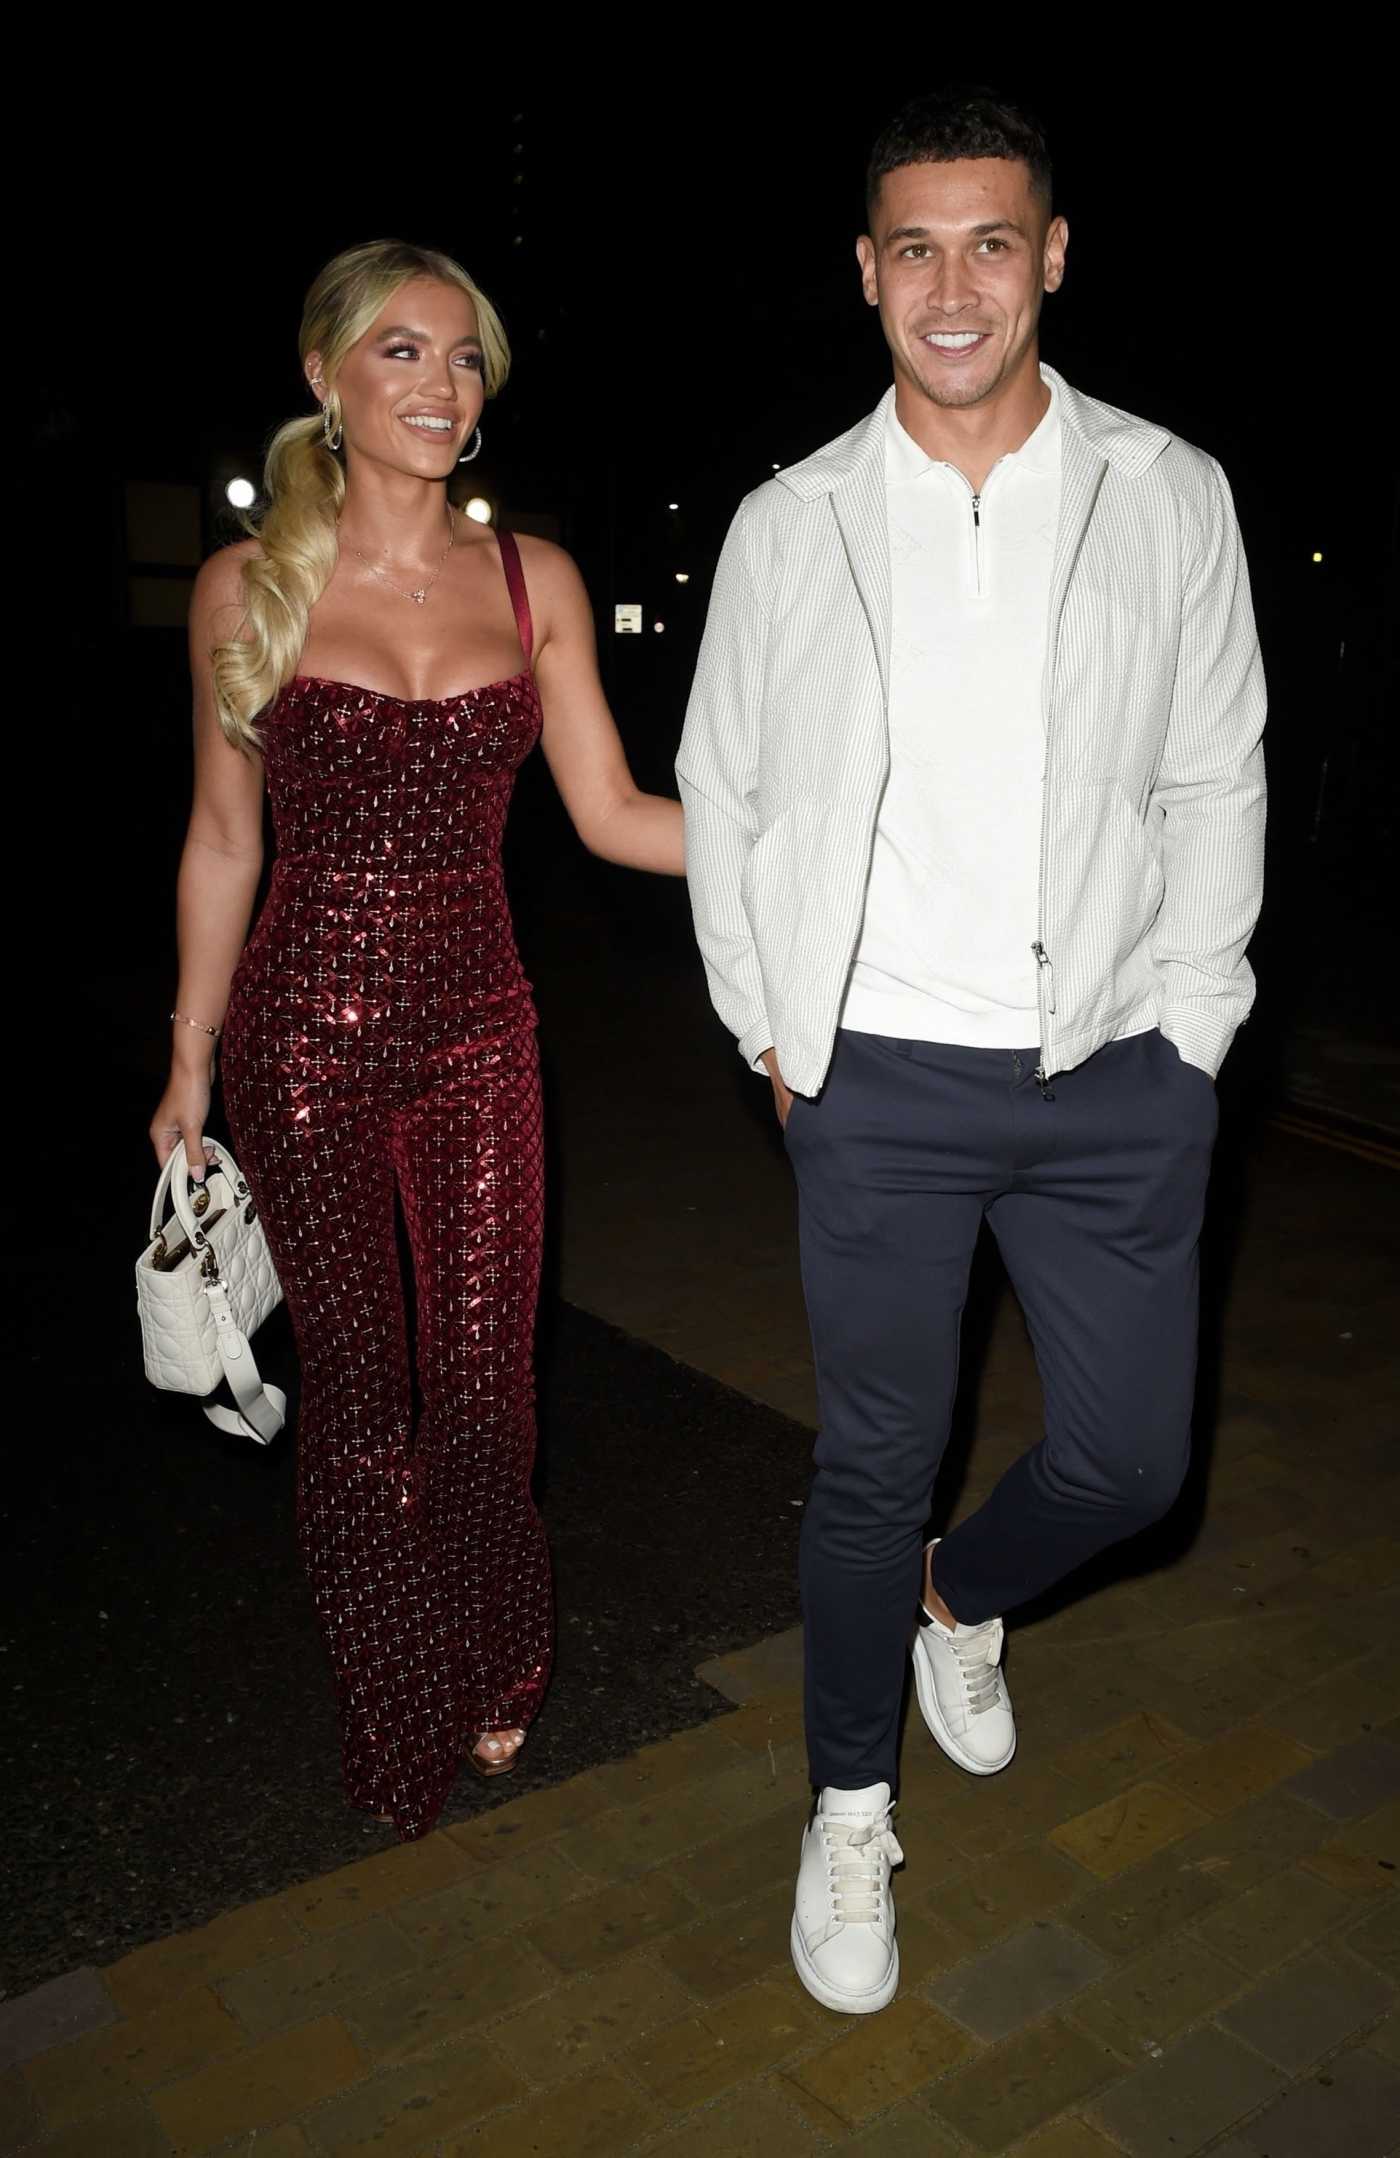 Molly Smith in a Burgundy Color Catsuit Arrives on New Year Eve Date Night with Callum Jones at Menagerie Bar and Restaurant in Manchester 12/31/2021